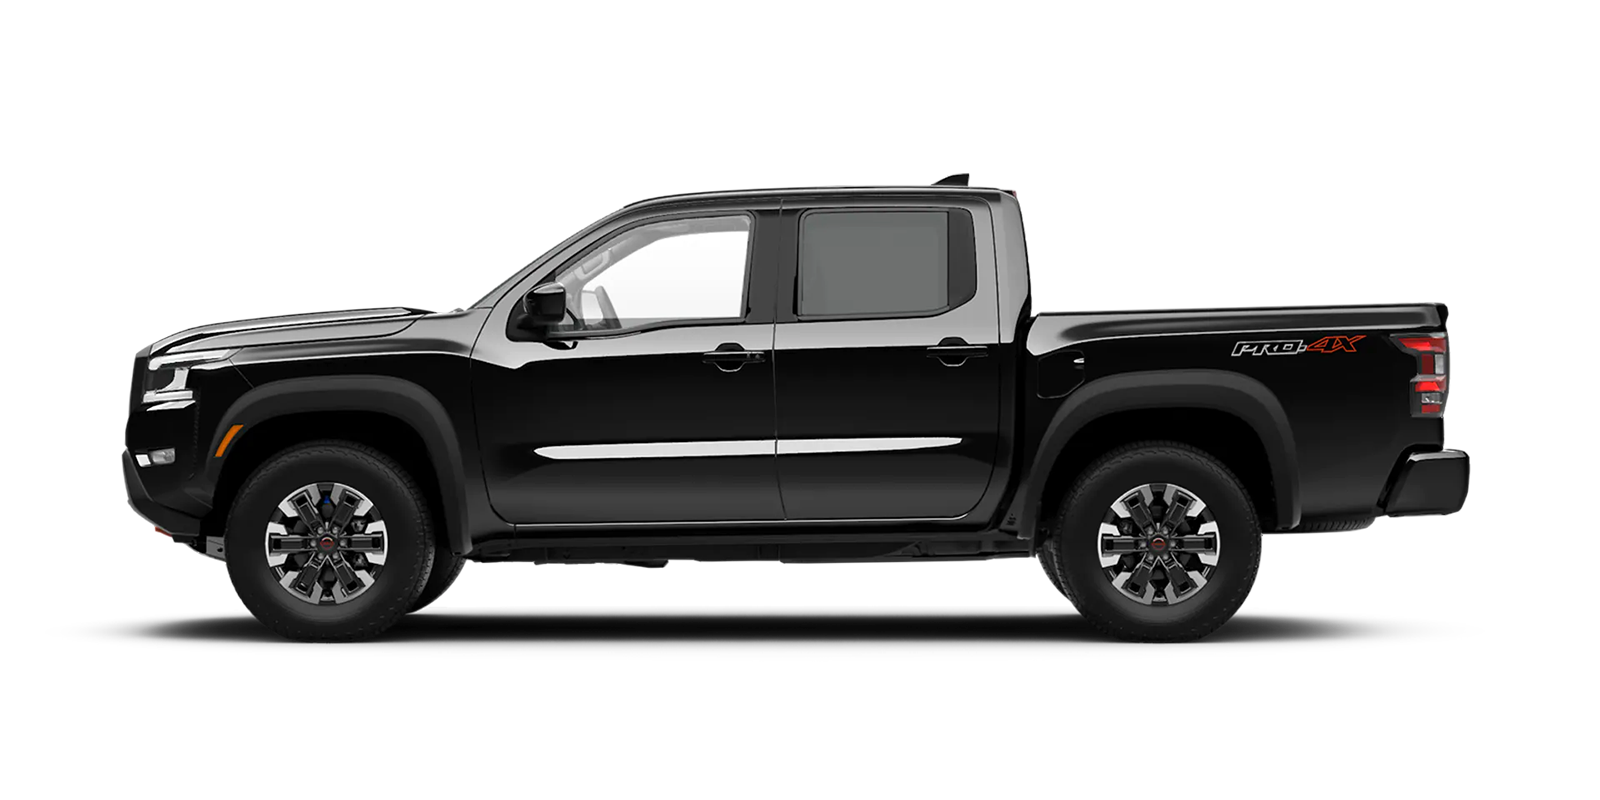 2022 Frontier Crew Cab Pro-4X 4x4 in Super Black | Rusty Wallace Nissan in Knoxville TN